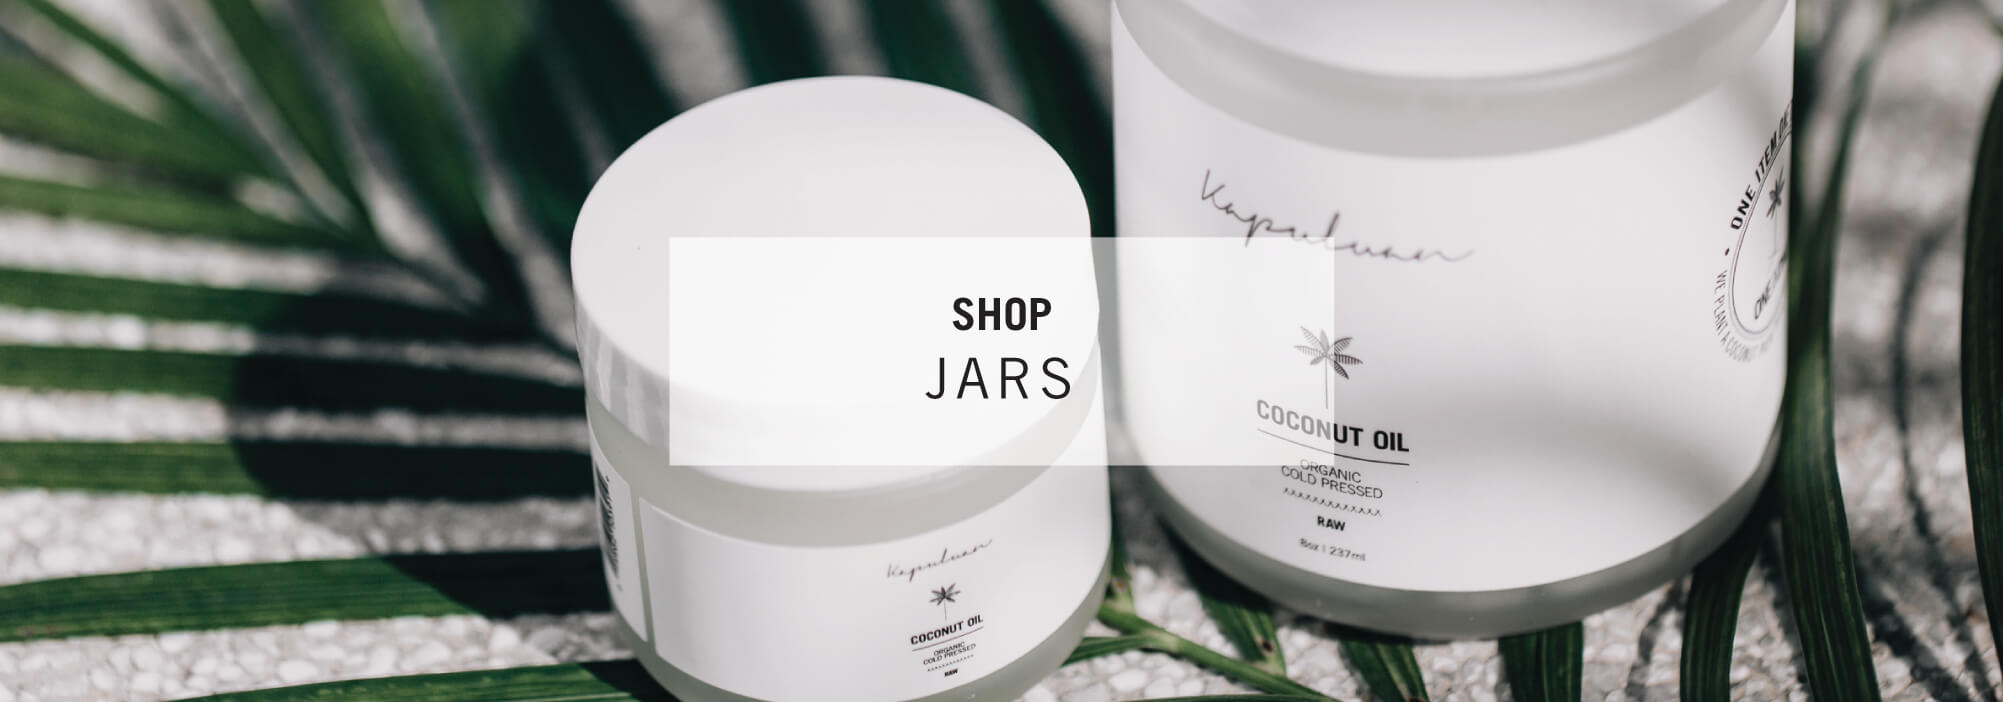 Elegant cosmetic jars nestled among tropical coconut leaves on a woven texture, promoting a natural skincare shopping experience.